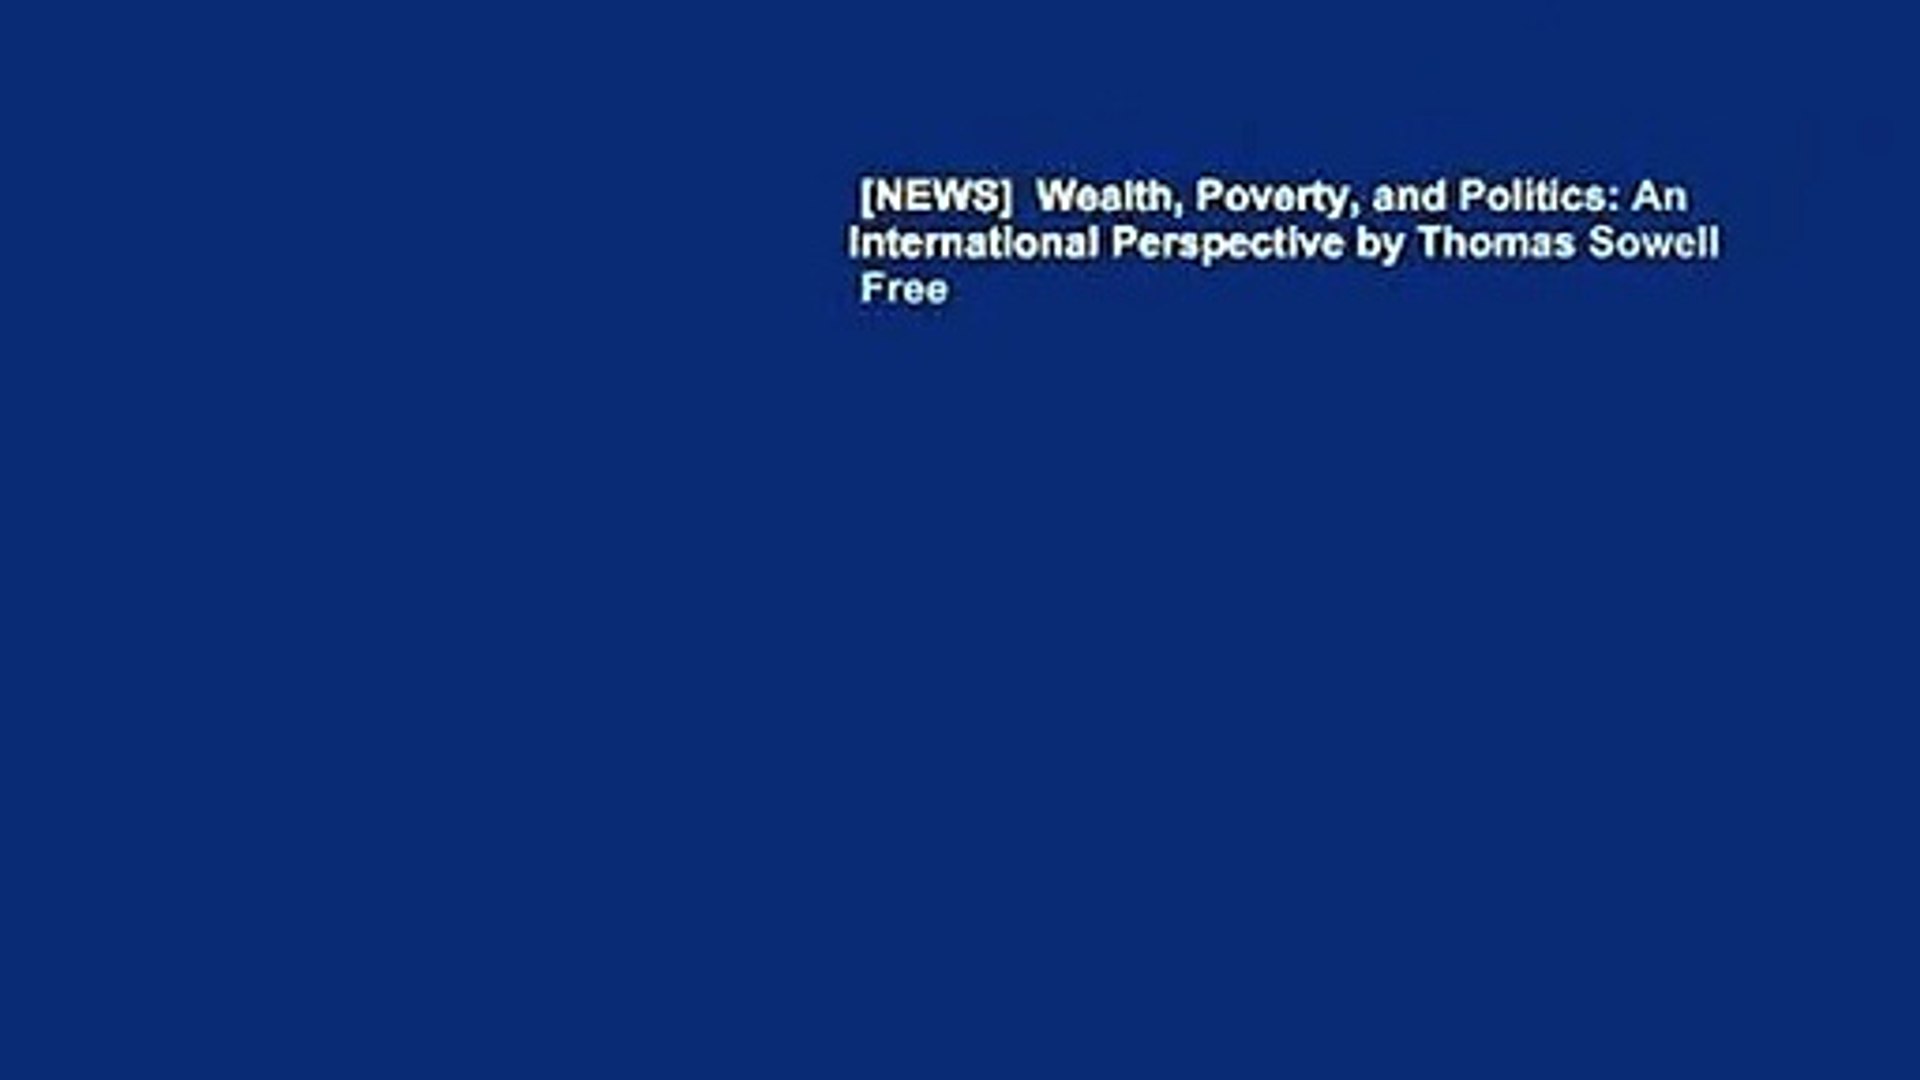 [NEWS]  Wealth, Poverty, and Politics: An International Perspective by Thomas